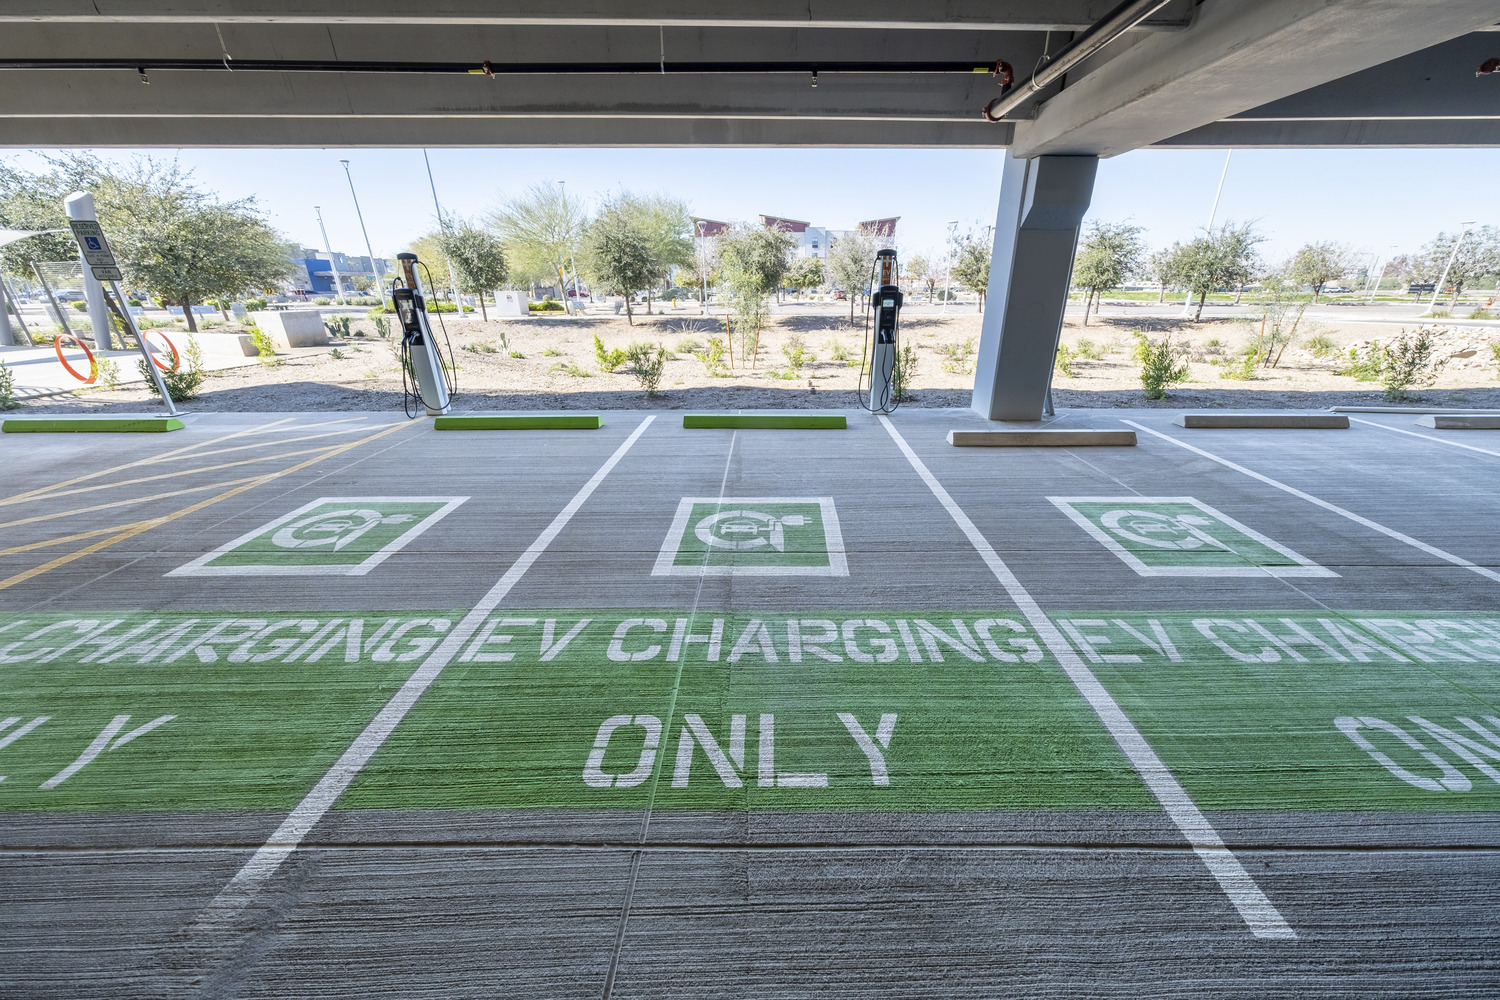 Own or Operate EV Chargers? Take Our Survey!